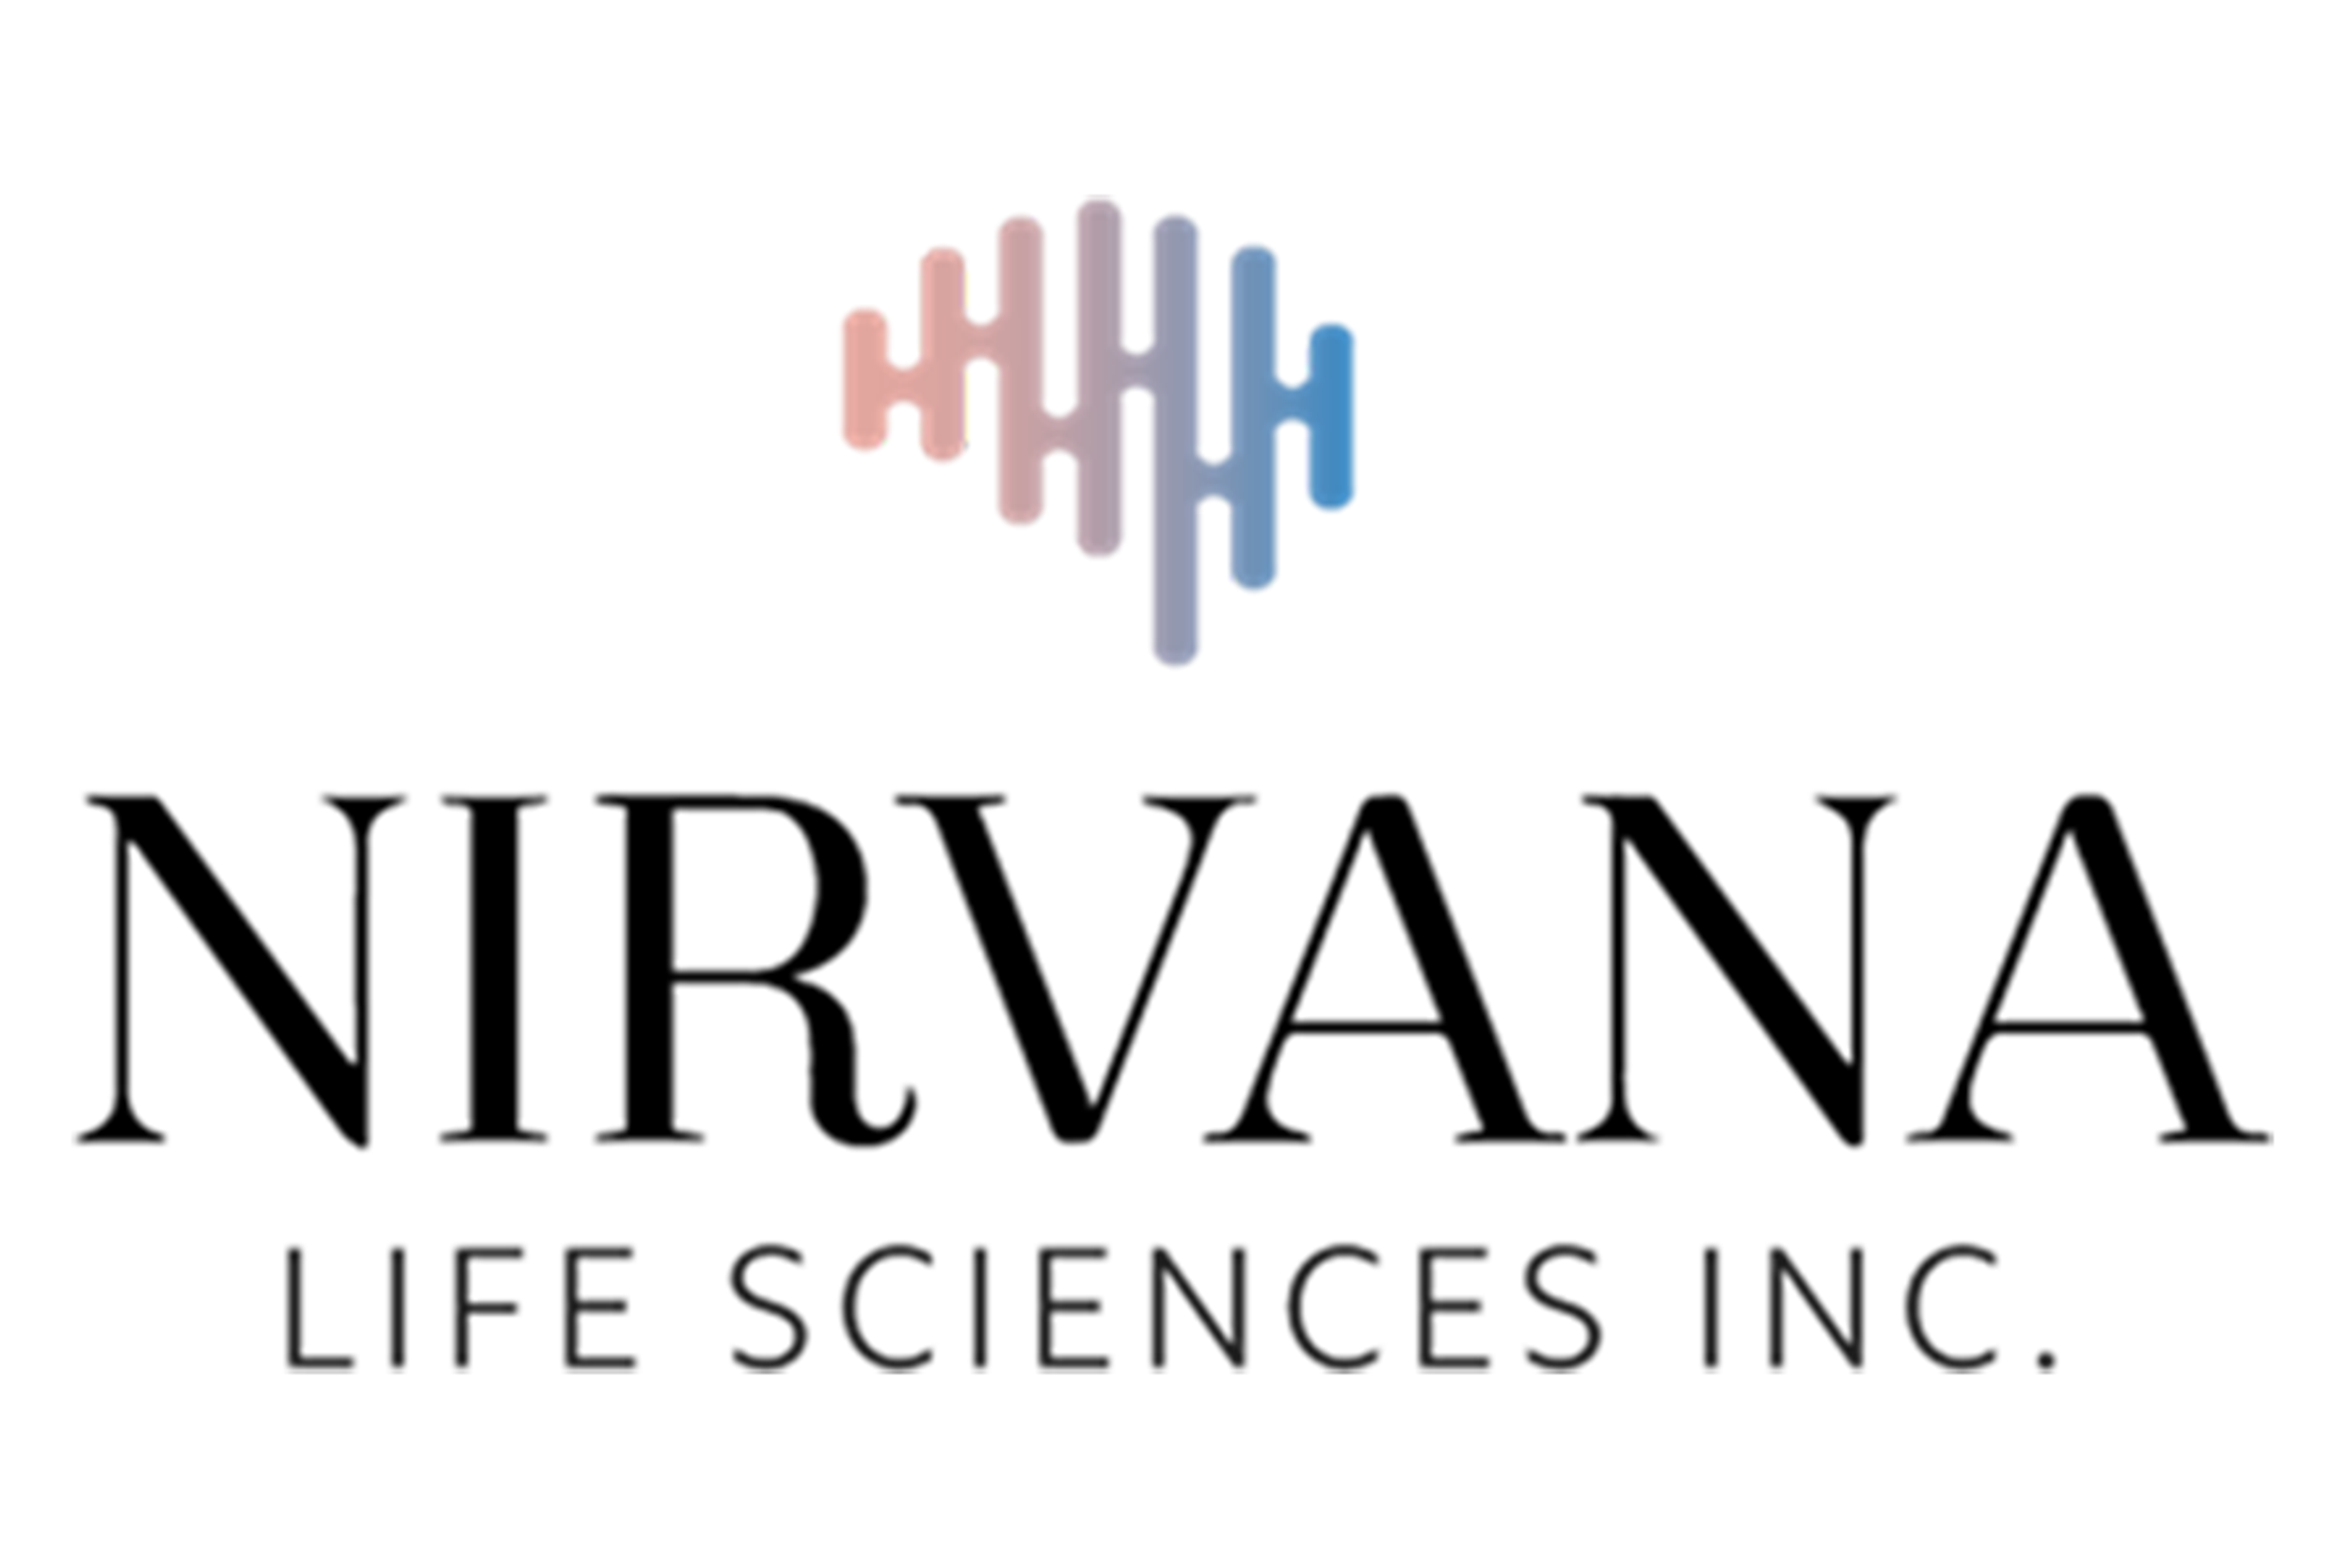 Nirvana Life Sciences Inc. Announces the Appointment of Jakson Inwentash to the Board of Directors